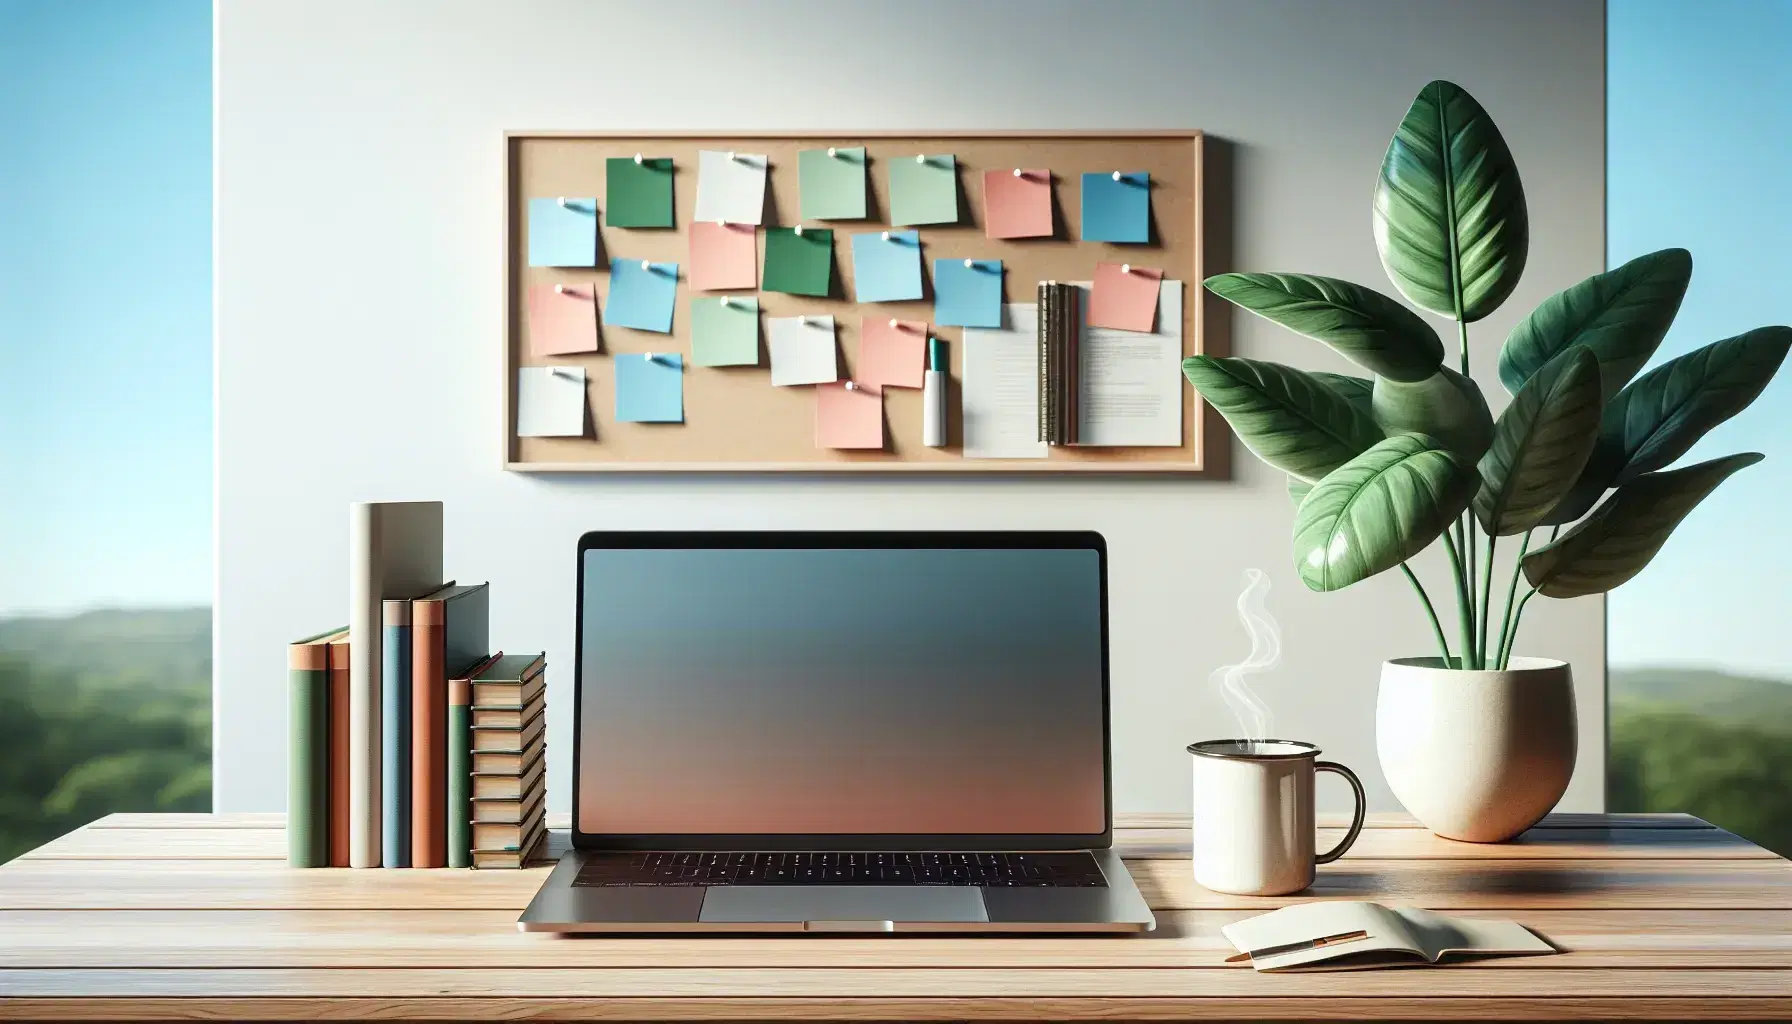 Tidy office with wooden desk, closed laptop, green plant, cup of coffee, colorful books and notice board with pastel notes.